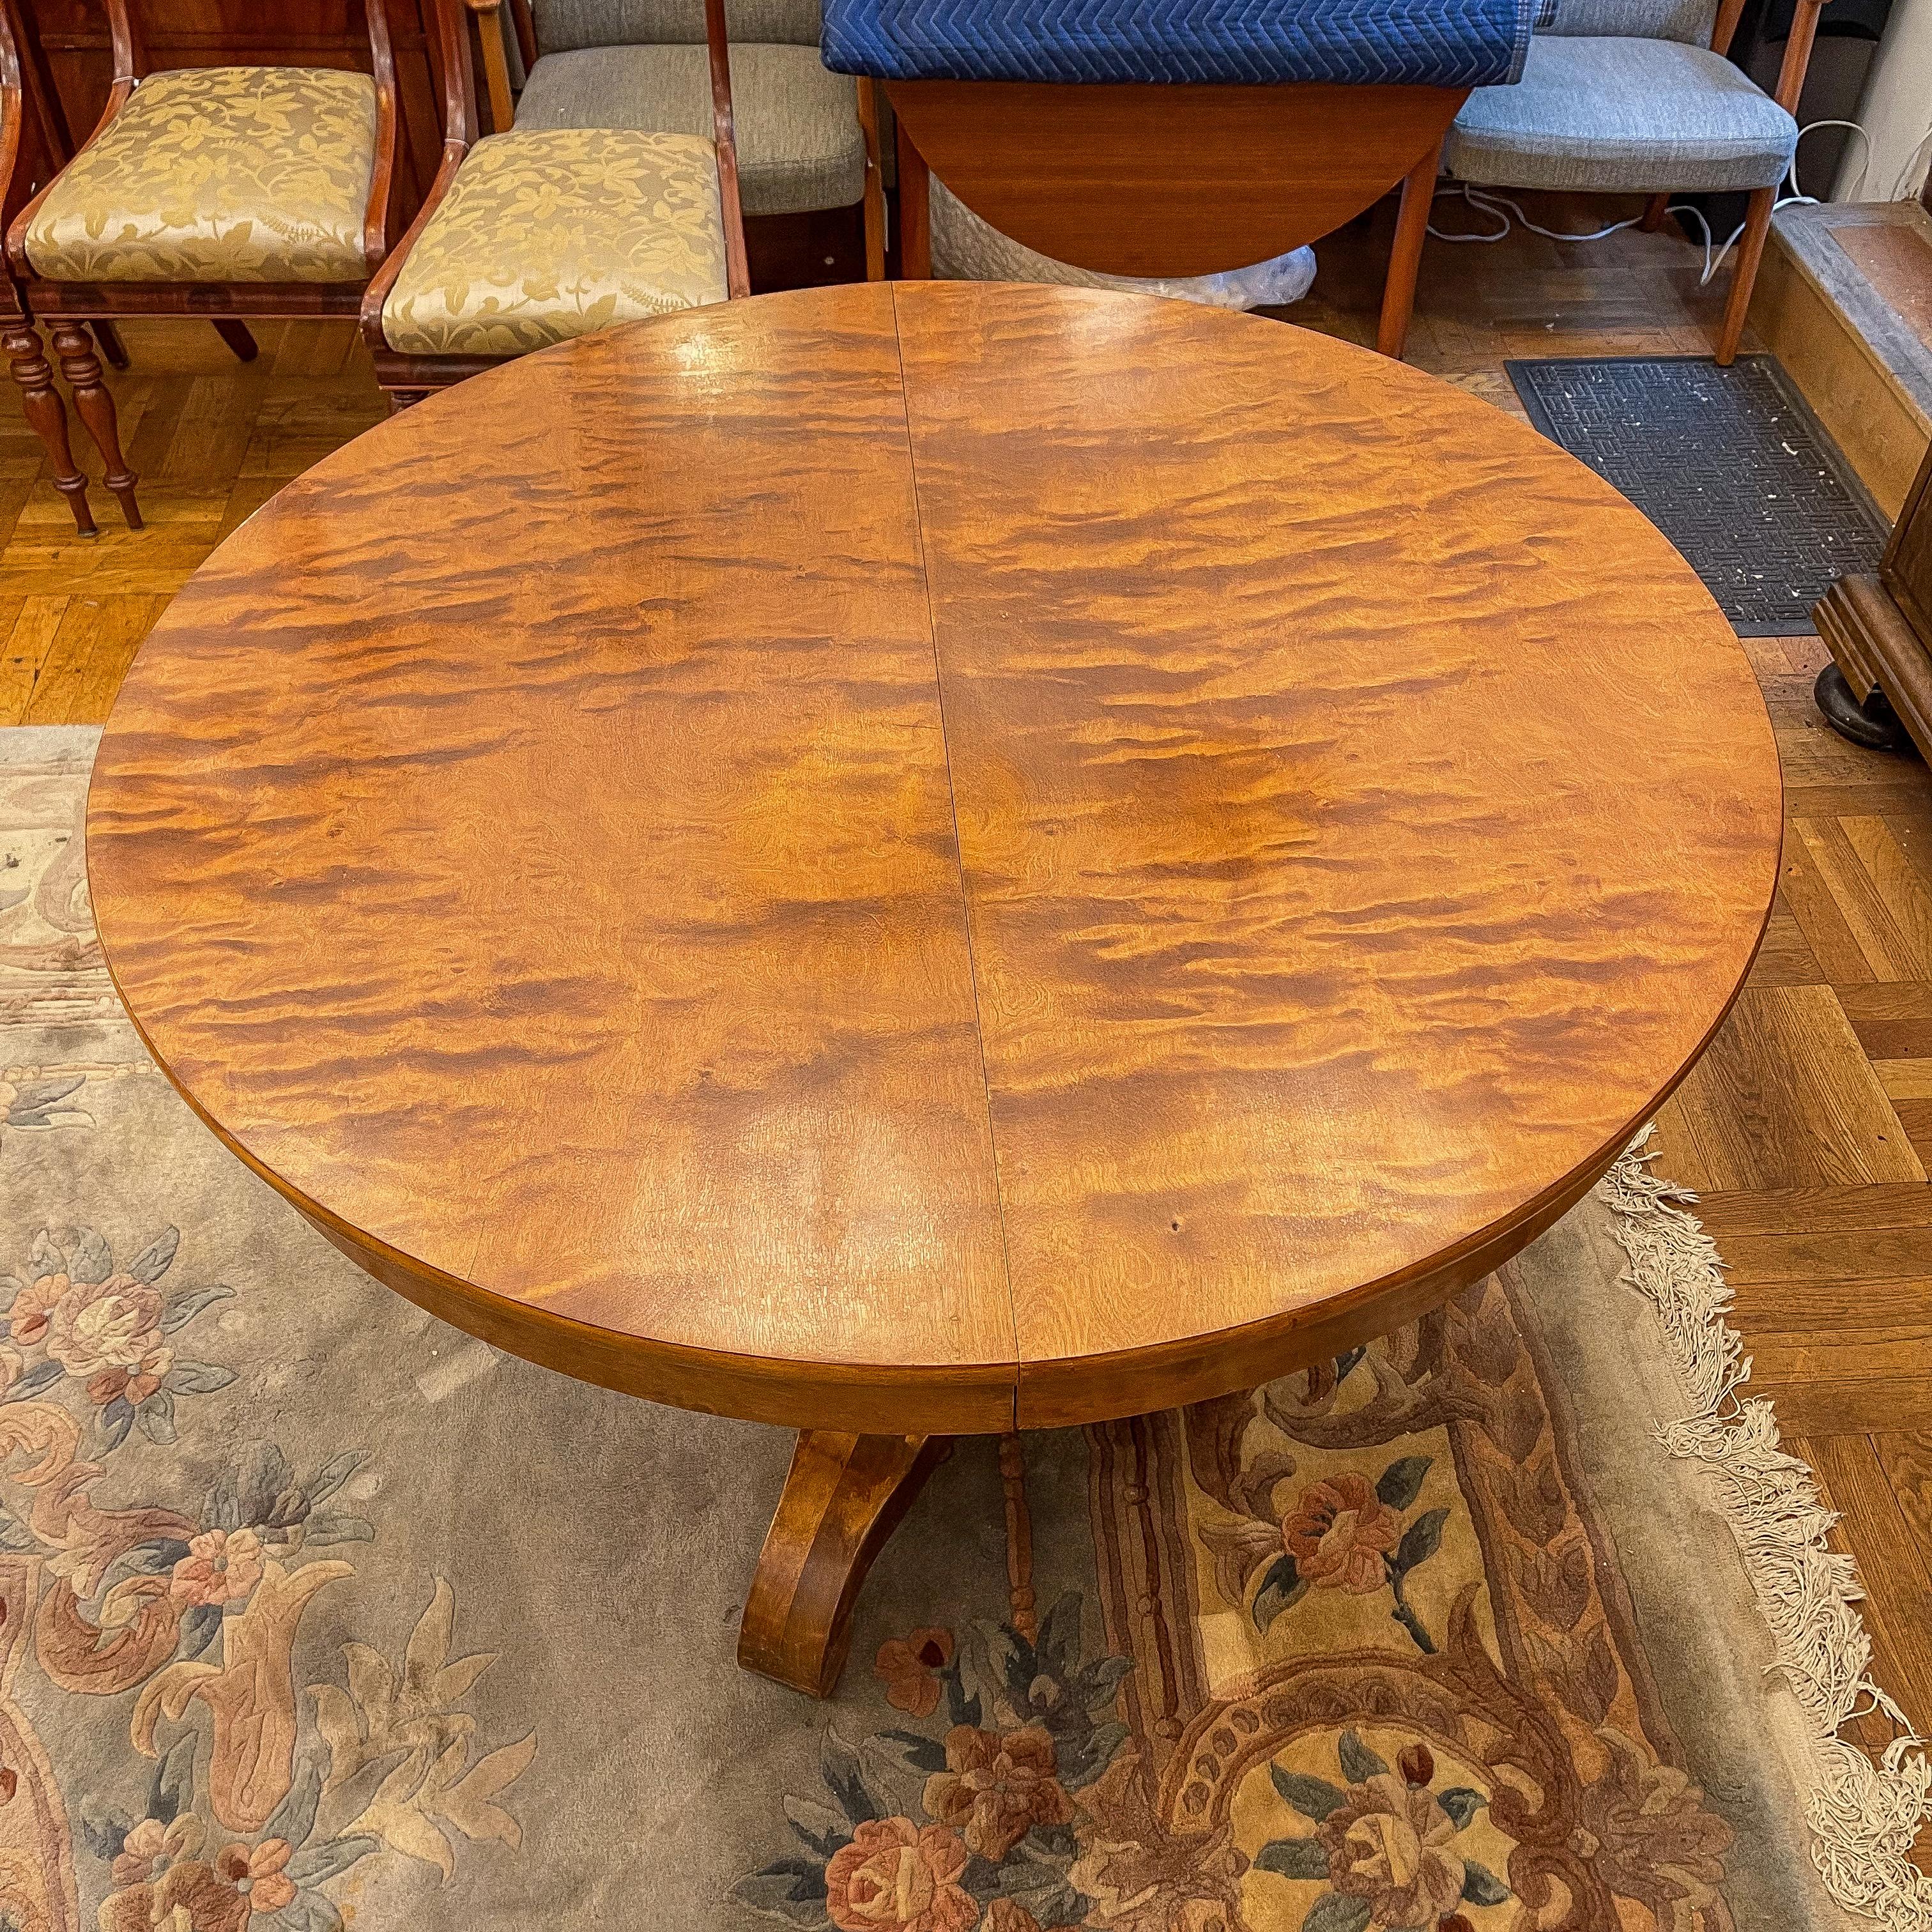 An elegant dining table from the end of the 19th century that extends easily for additional guests. All facing surfaces are veneered in birch, stained to a rich caramel color.  The entire assembly rests on an elegant pedestal base.  With one leaf,